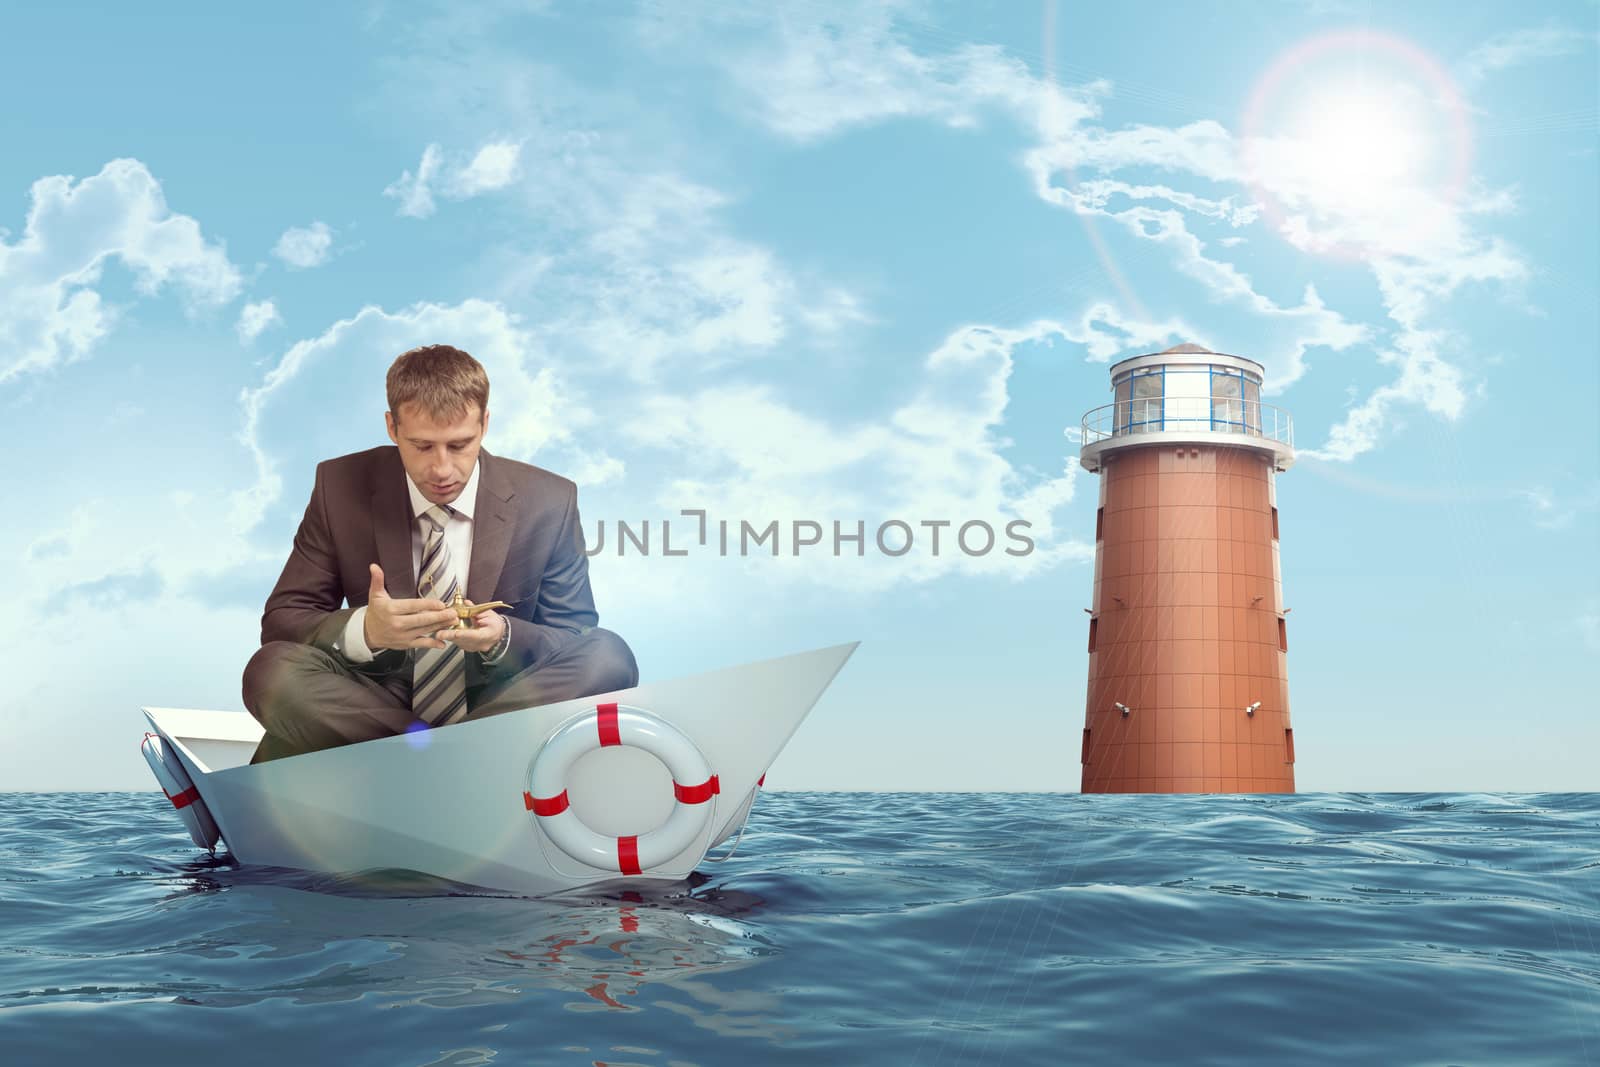 Businessman sitting in lotus position in paper boat in sea and looking at oil lamp